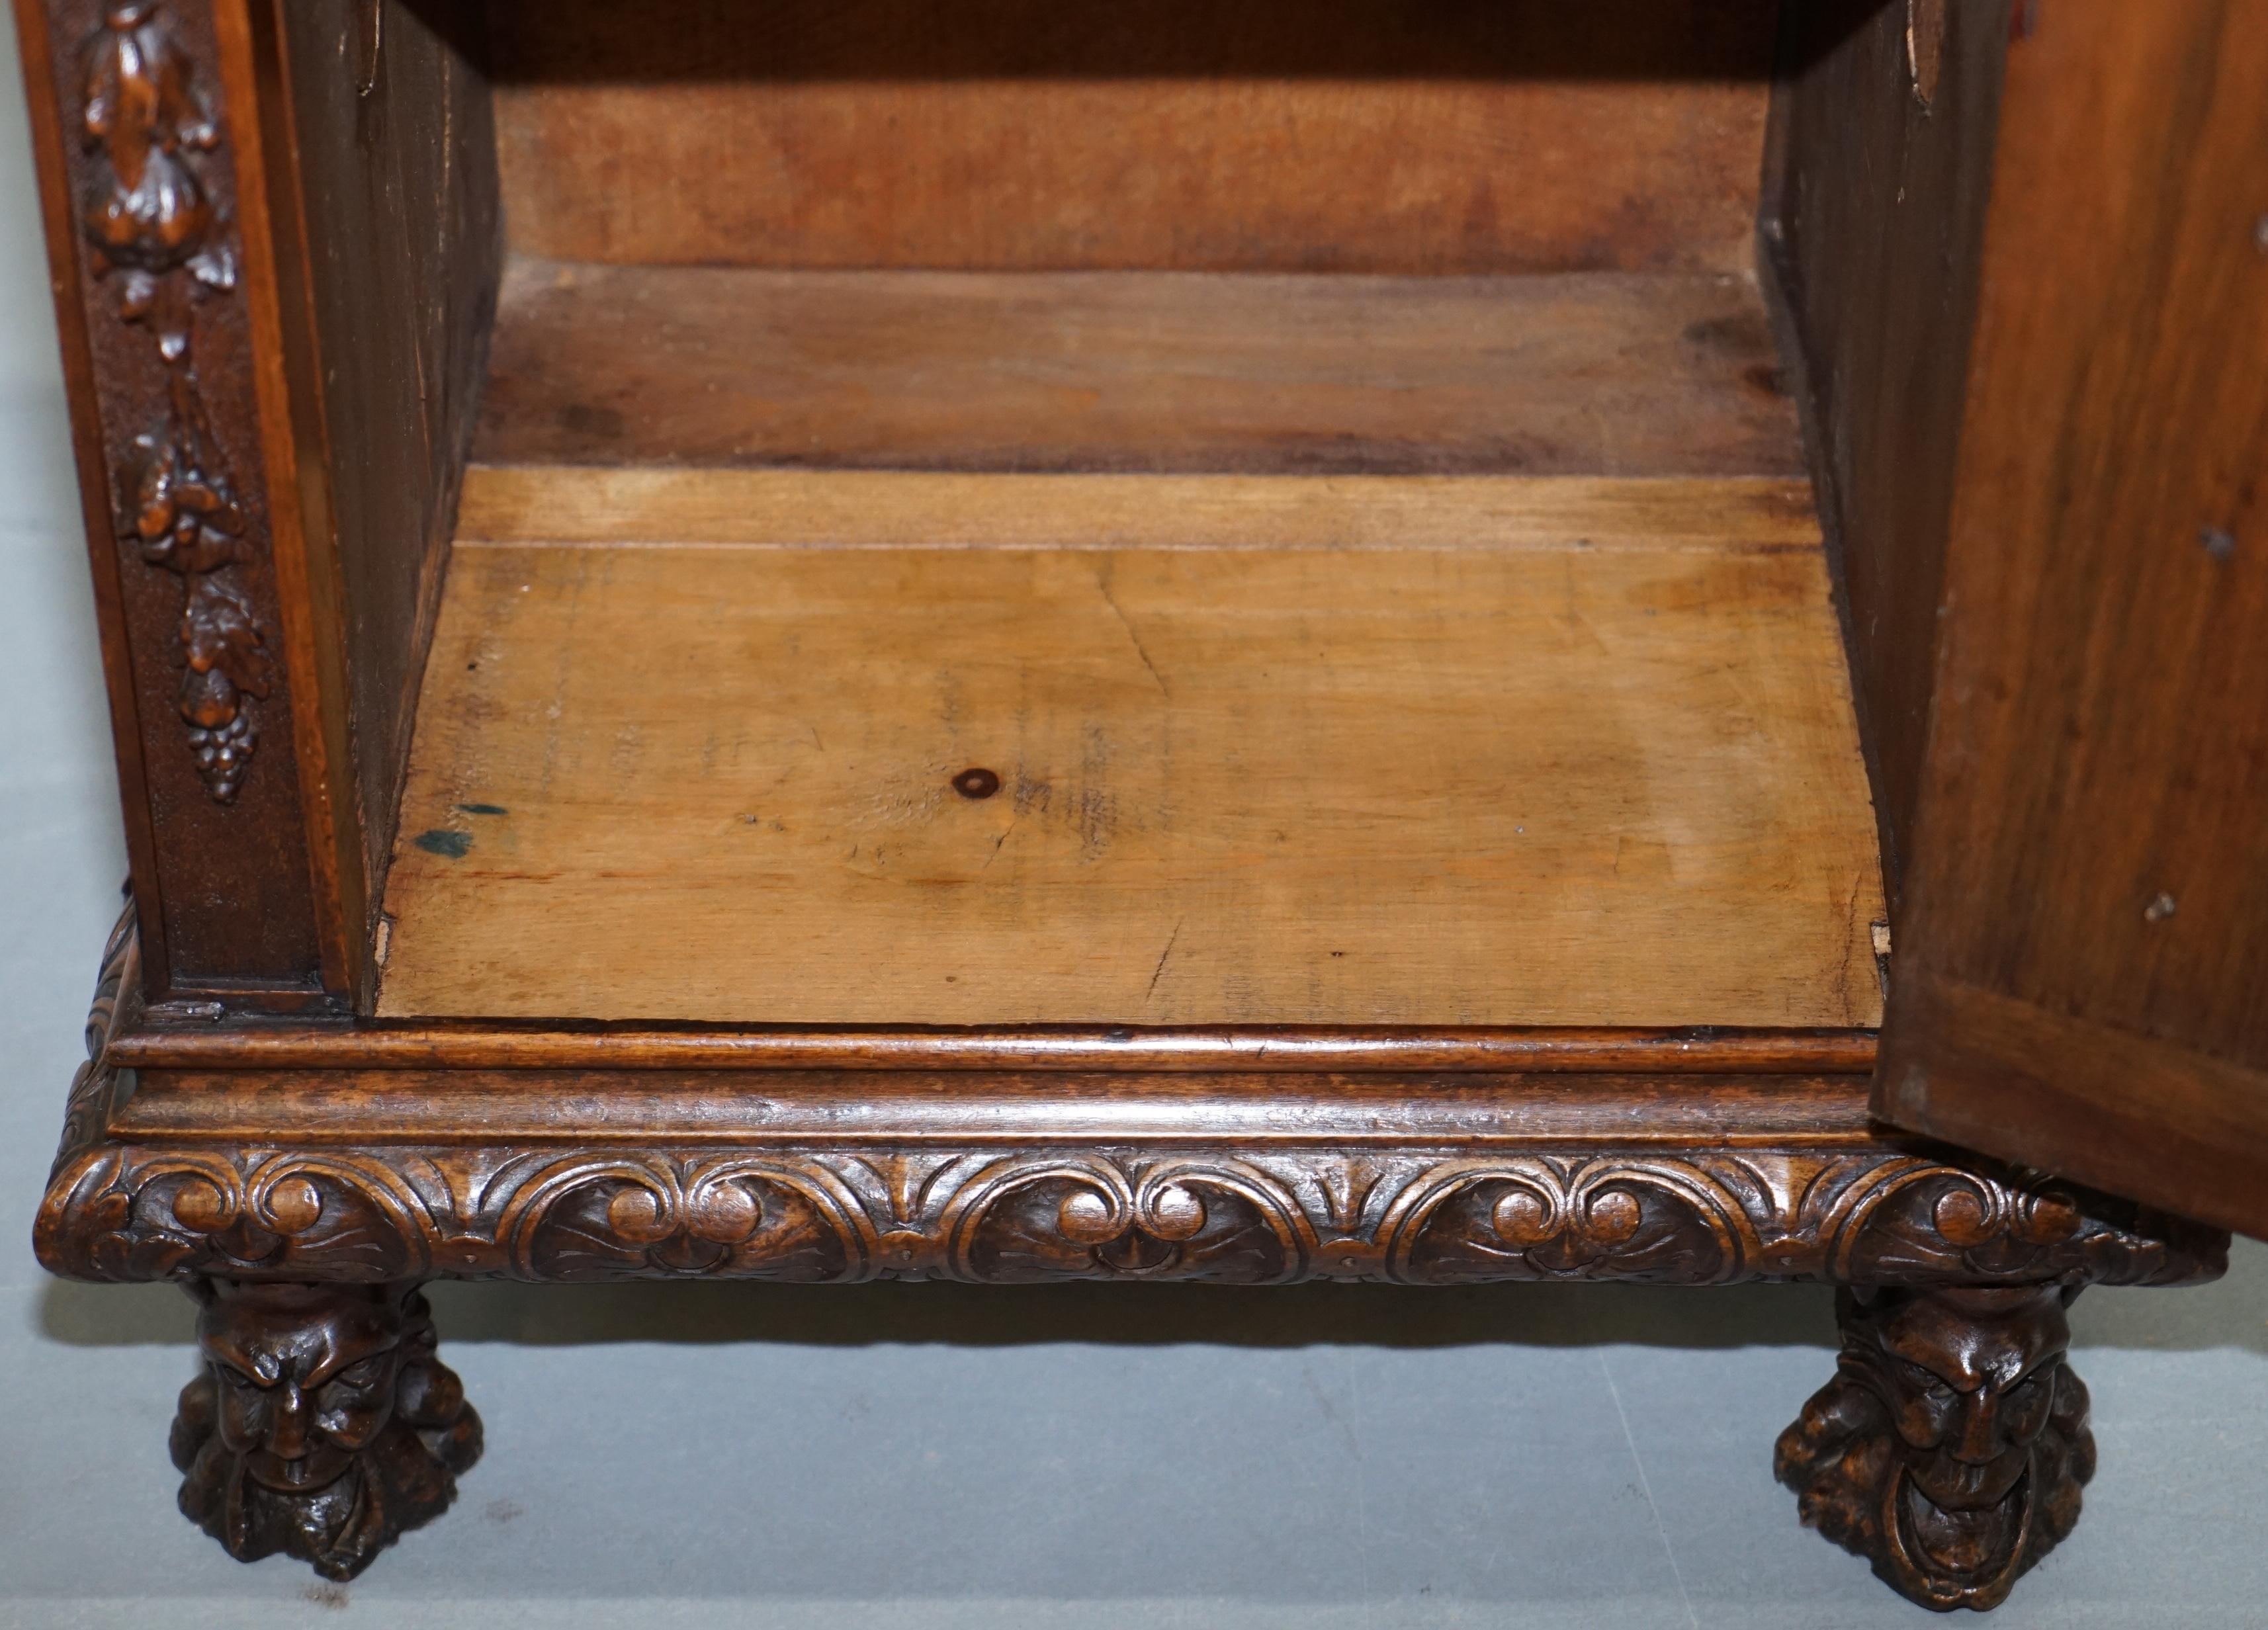 Stunning circa 1780 Carved Walnut Side Cabinet with Cherub & Floral Detailing 13